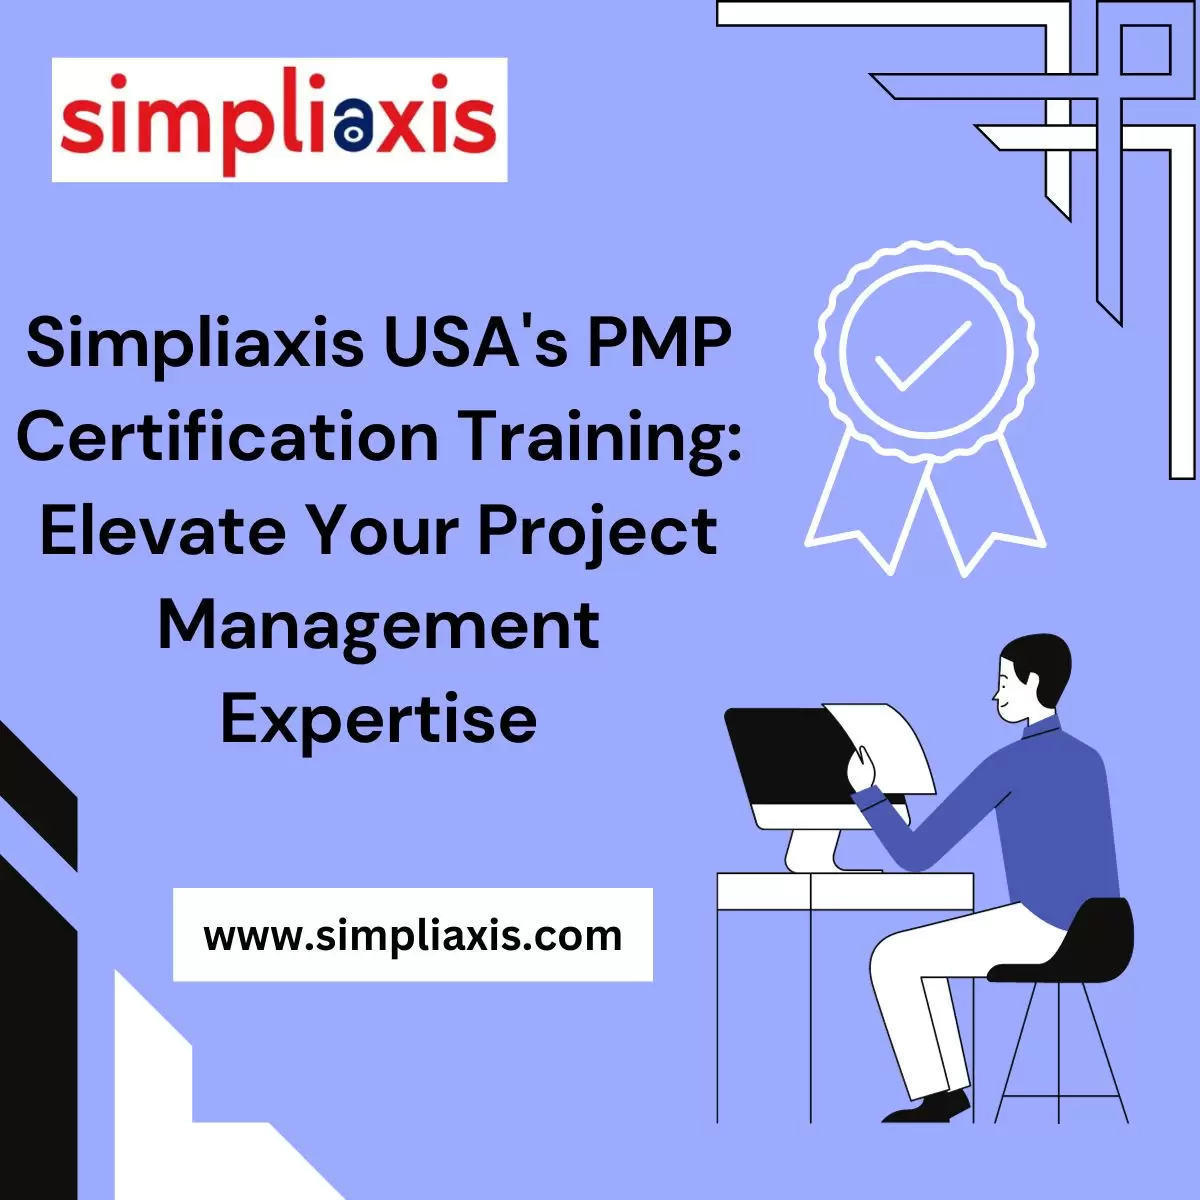 Simpliaxis USA's PMP Certification Training: Elevate Your Project